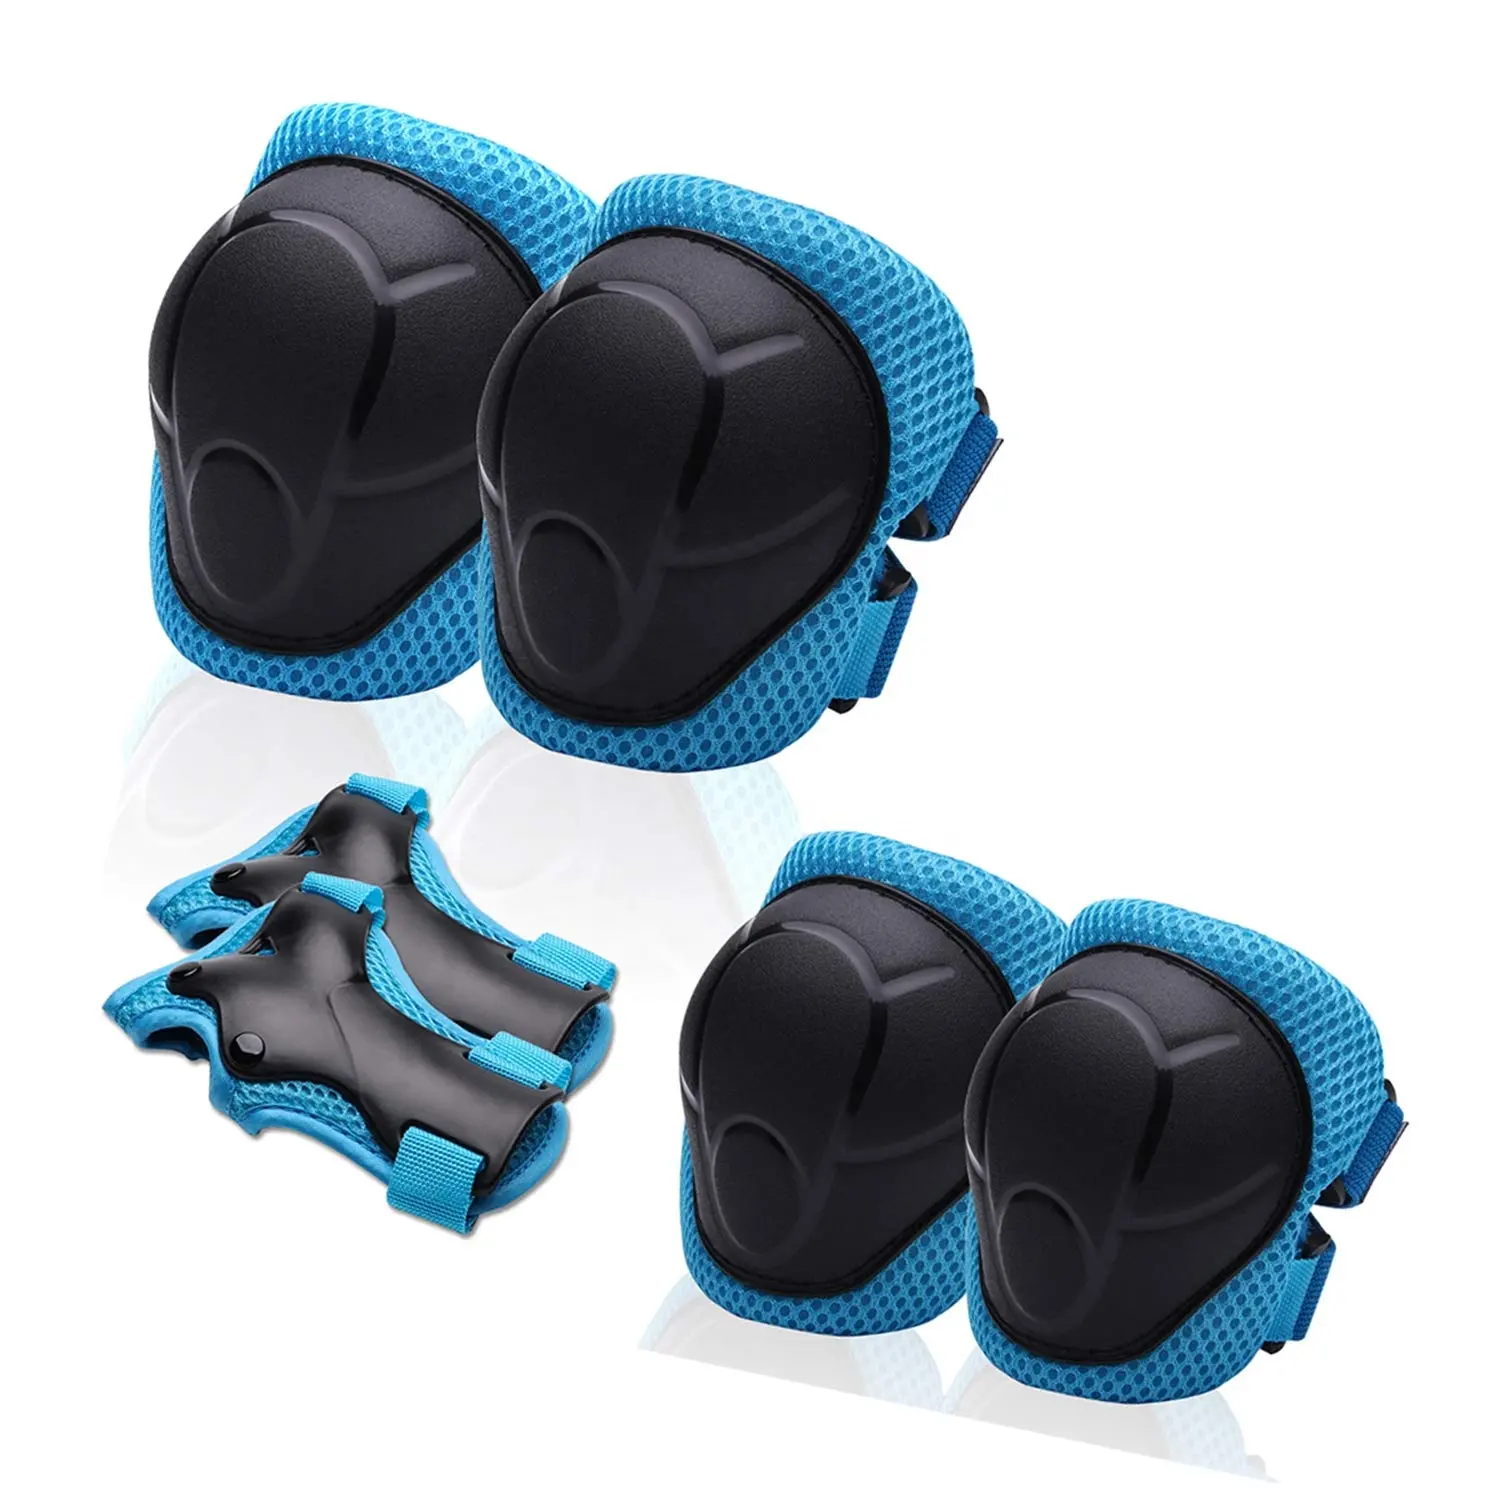 Hot Sales Sports Knee Pads for Baby Kids Protective Gear Adjustable Skating Bike Scooter Rollerblading Elbow Wrist Guards